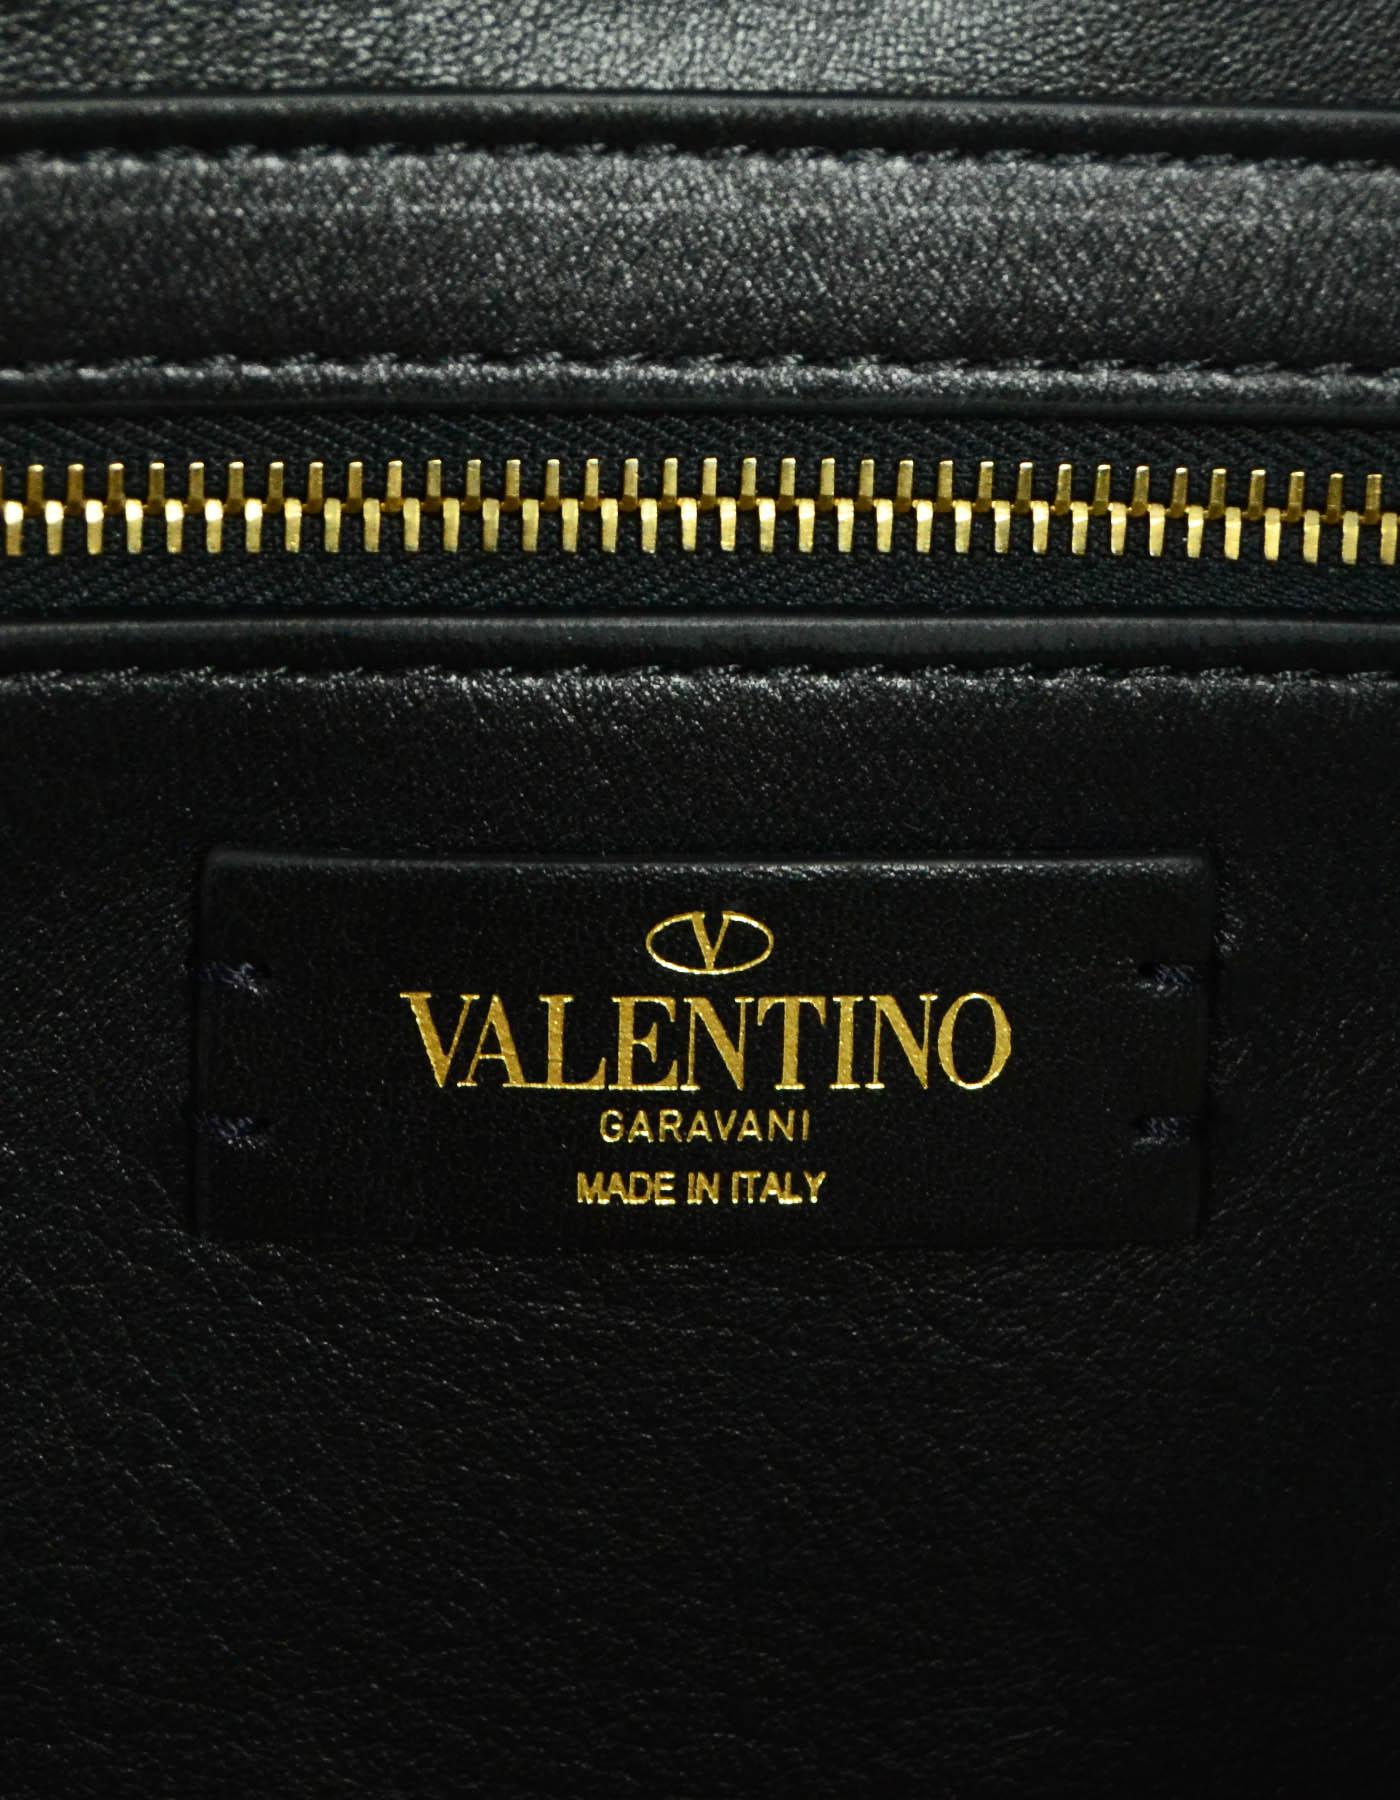 Women's Valentino LIKE NEW Black Leather Roman Stud Quilted Leather Tote Bag rt $4, 750